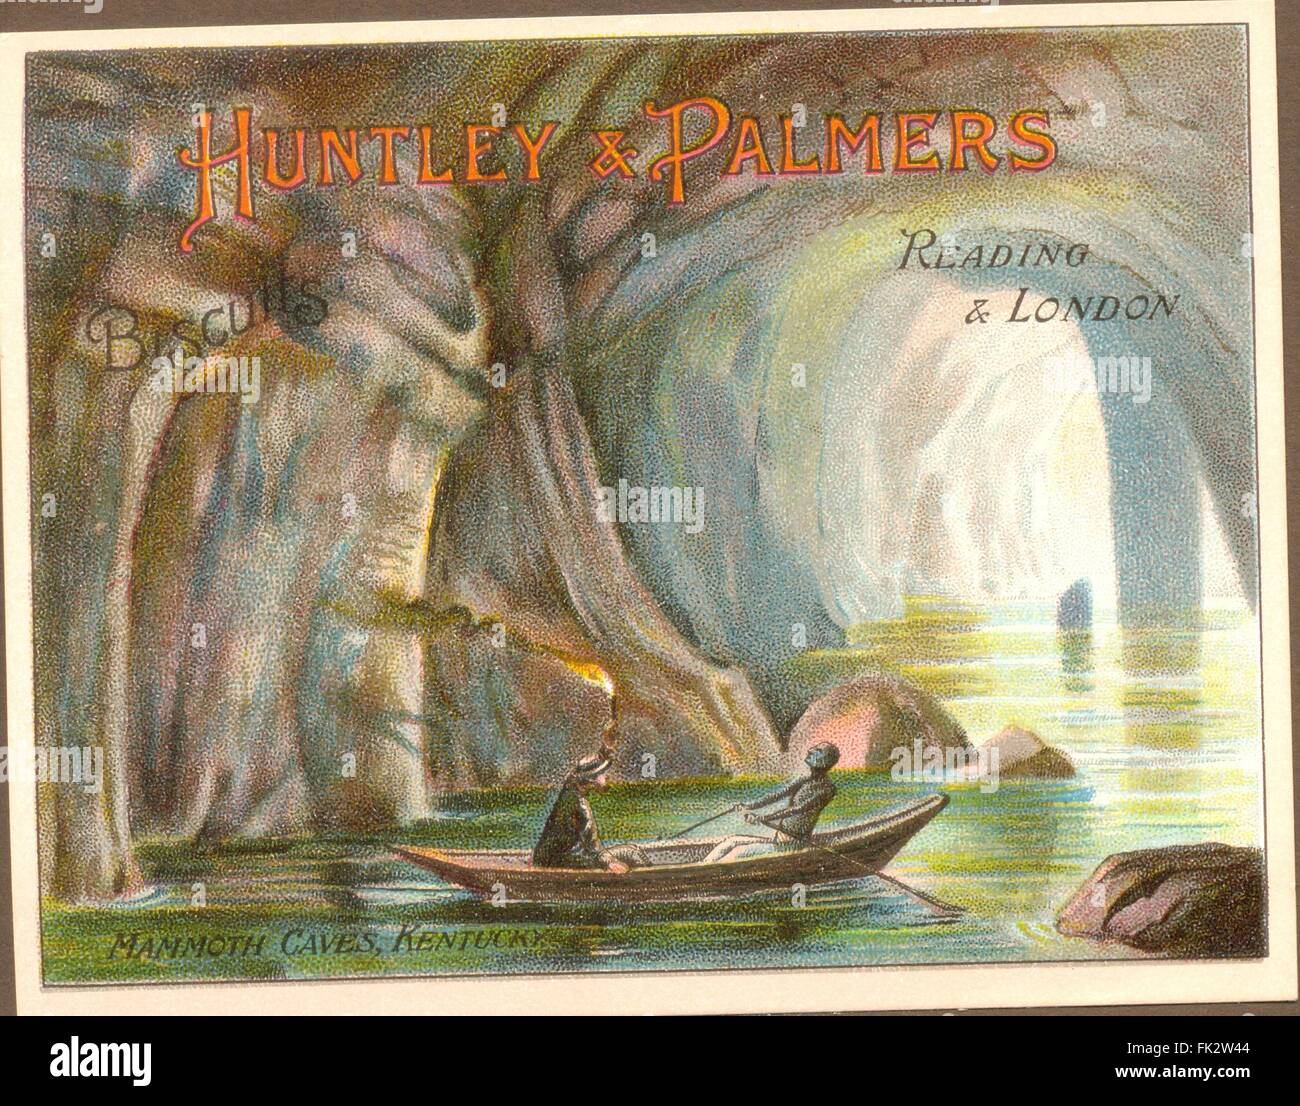 Chromolithographed trade card for Huntley & Palmers, Reading & London, UK Stock Photo